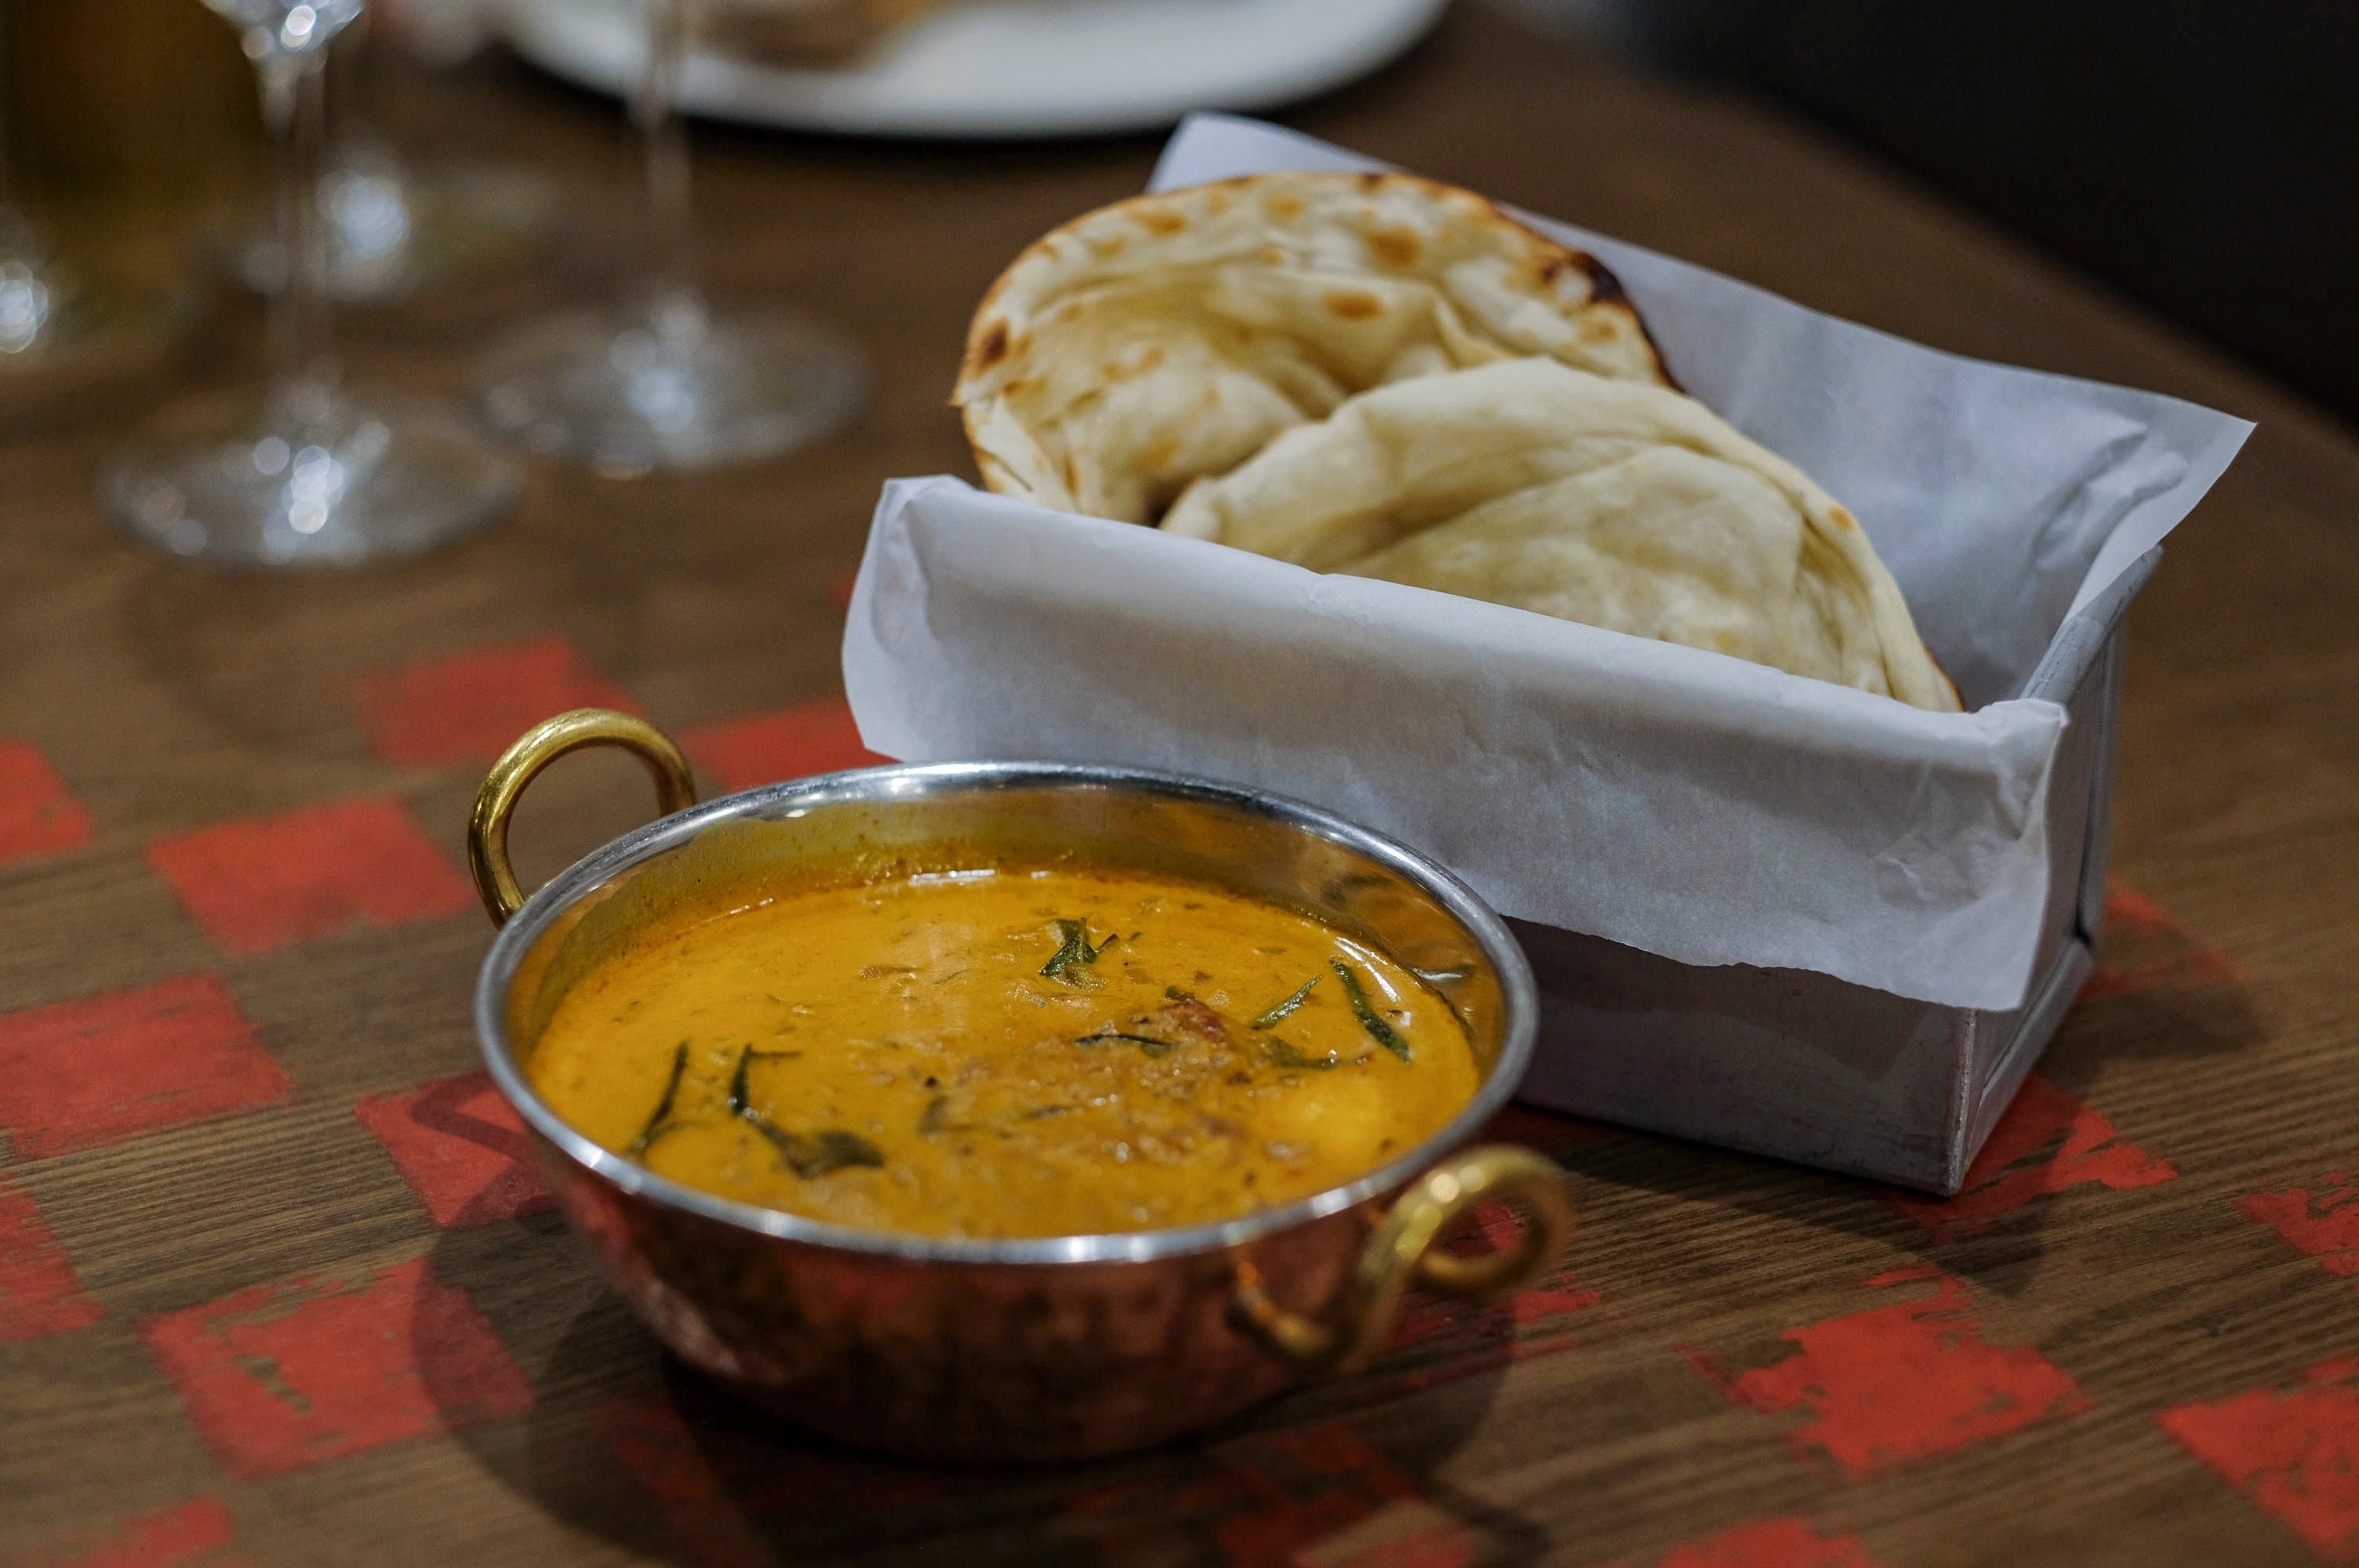 Kerala fish curry with butter naan at Chaiwala. Photo: Tory Ho